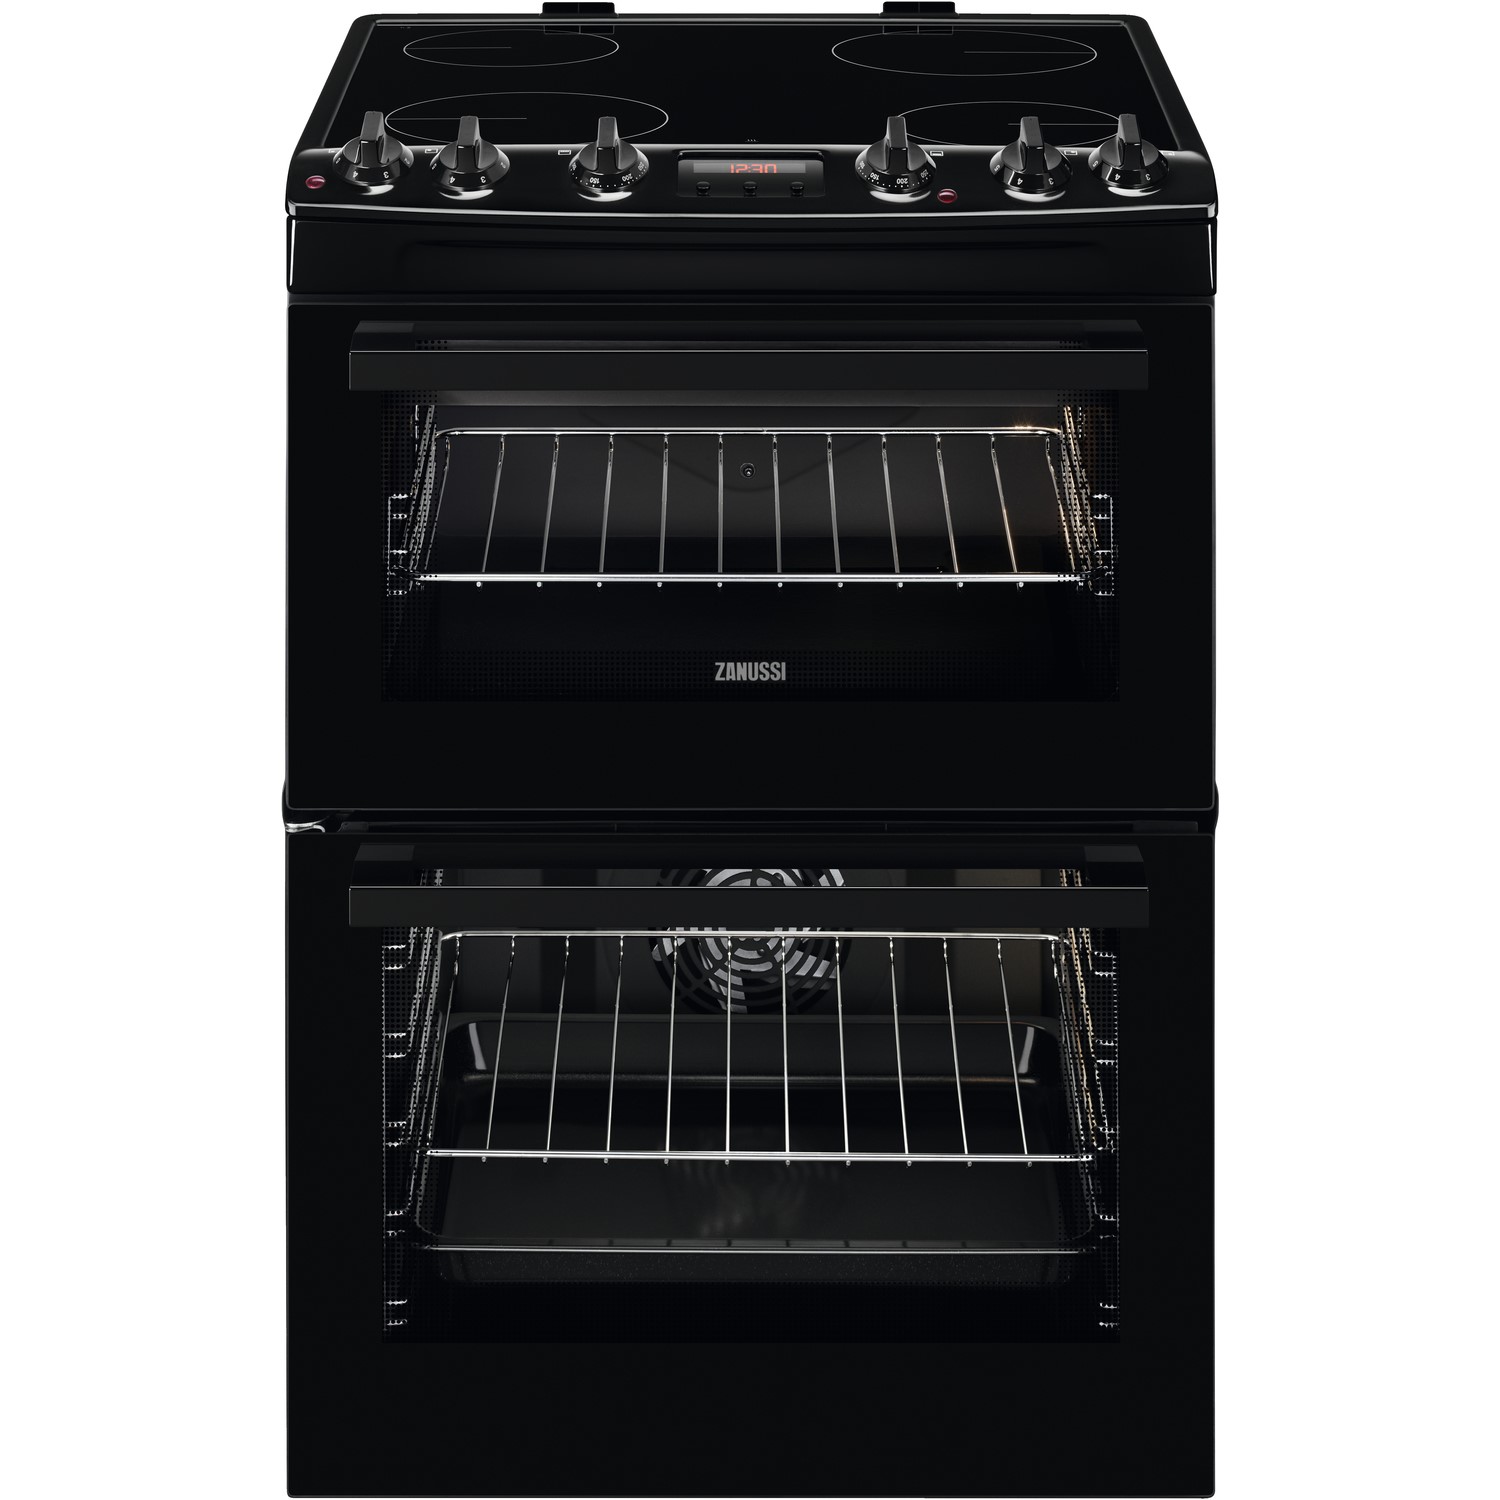 Refurbished Zanussi ZCV66250BA 60cm Double Oven Electric Cooker with Catalytic Liners Black